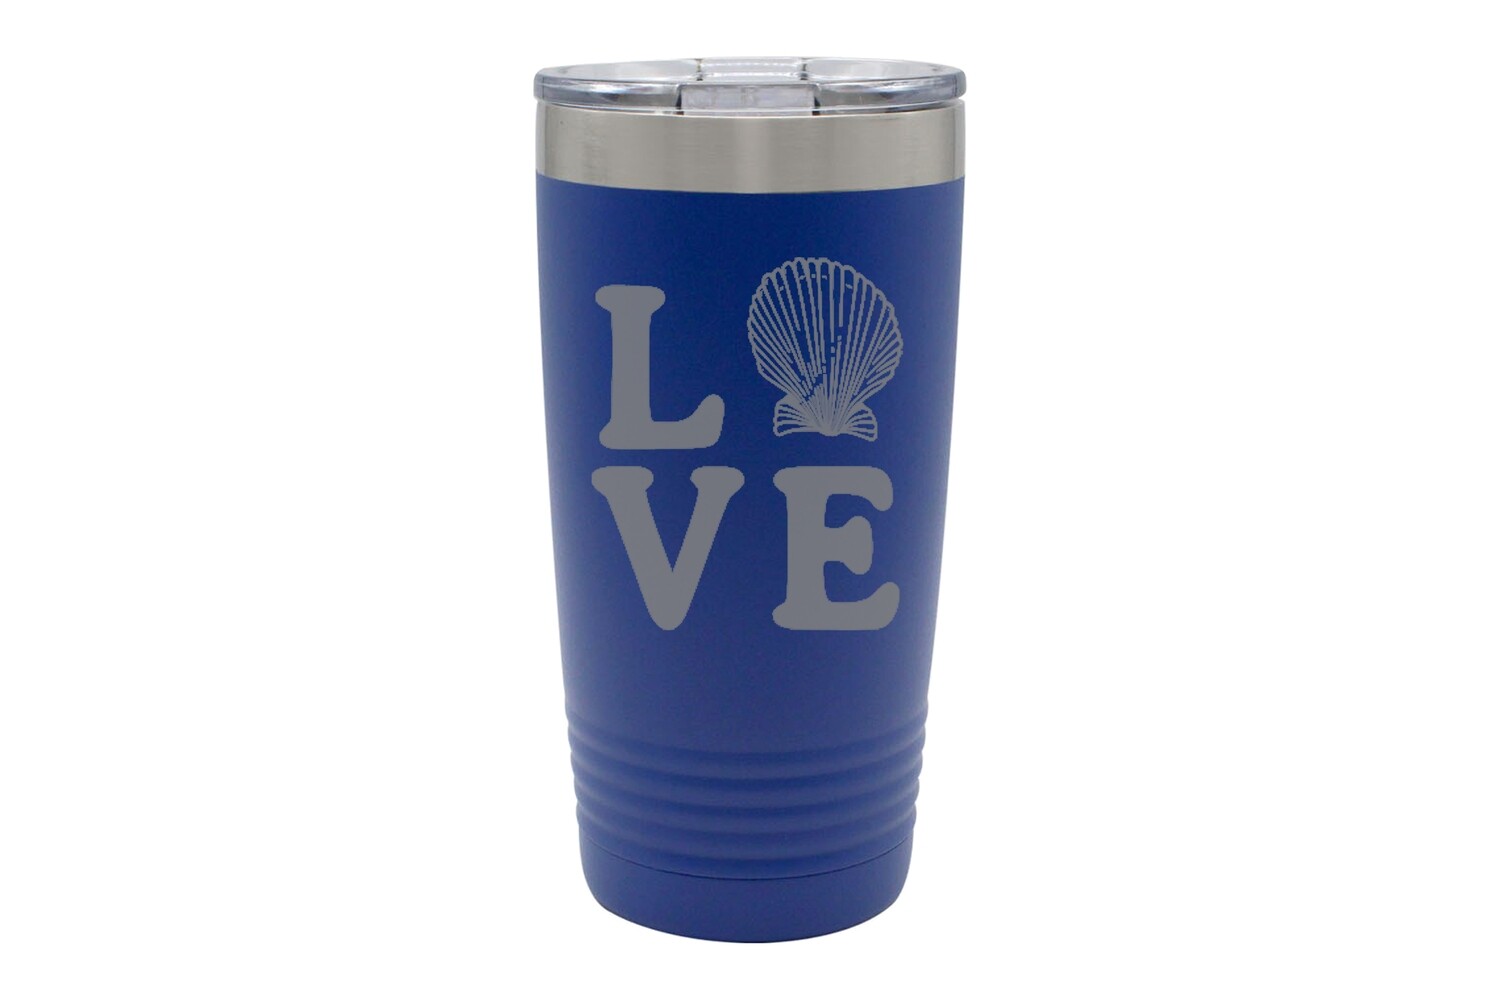 Love with Seashell Insulated Tumbler 20 oz